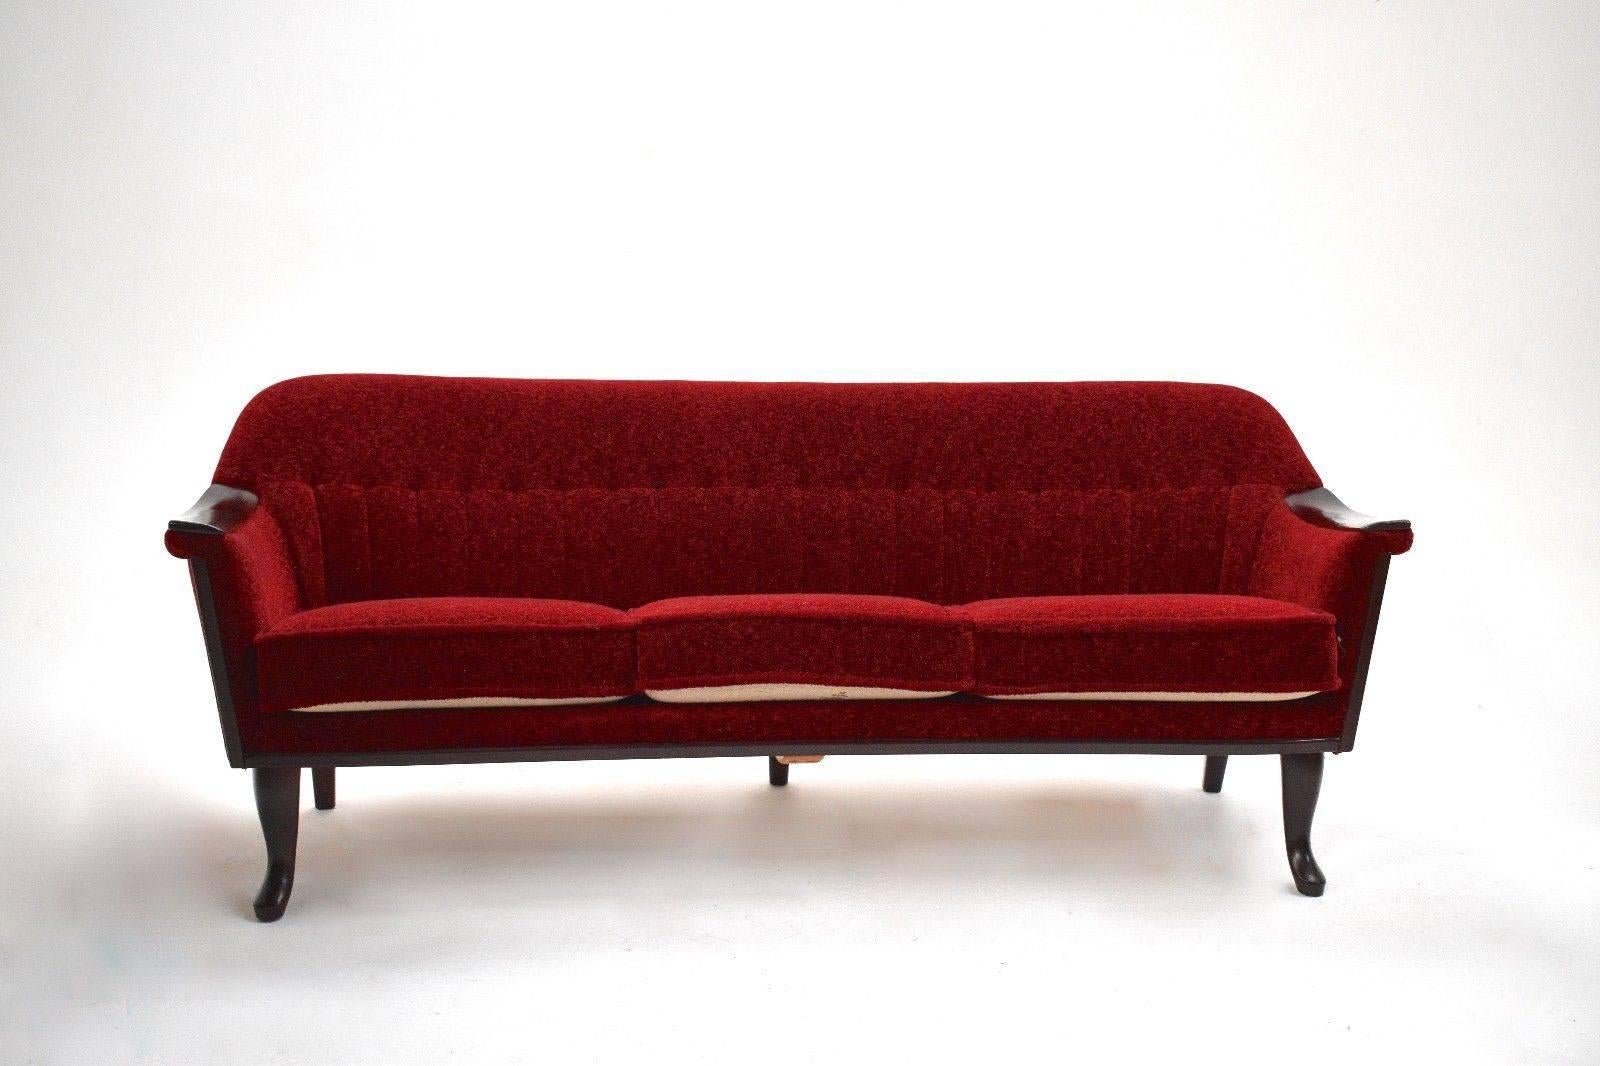 A beautiful Norwegian red fabric three-seat sofa, this would make a stylish addition to any living or work area. The sofa has a curved backrest and sculptured mahogany armrests for enhanced comfort. A striking piece of Classic Scandinavian